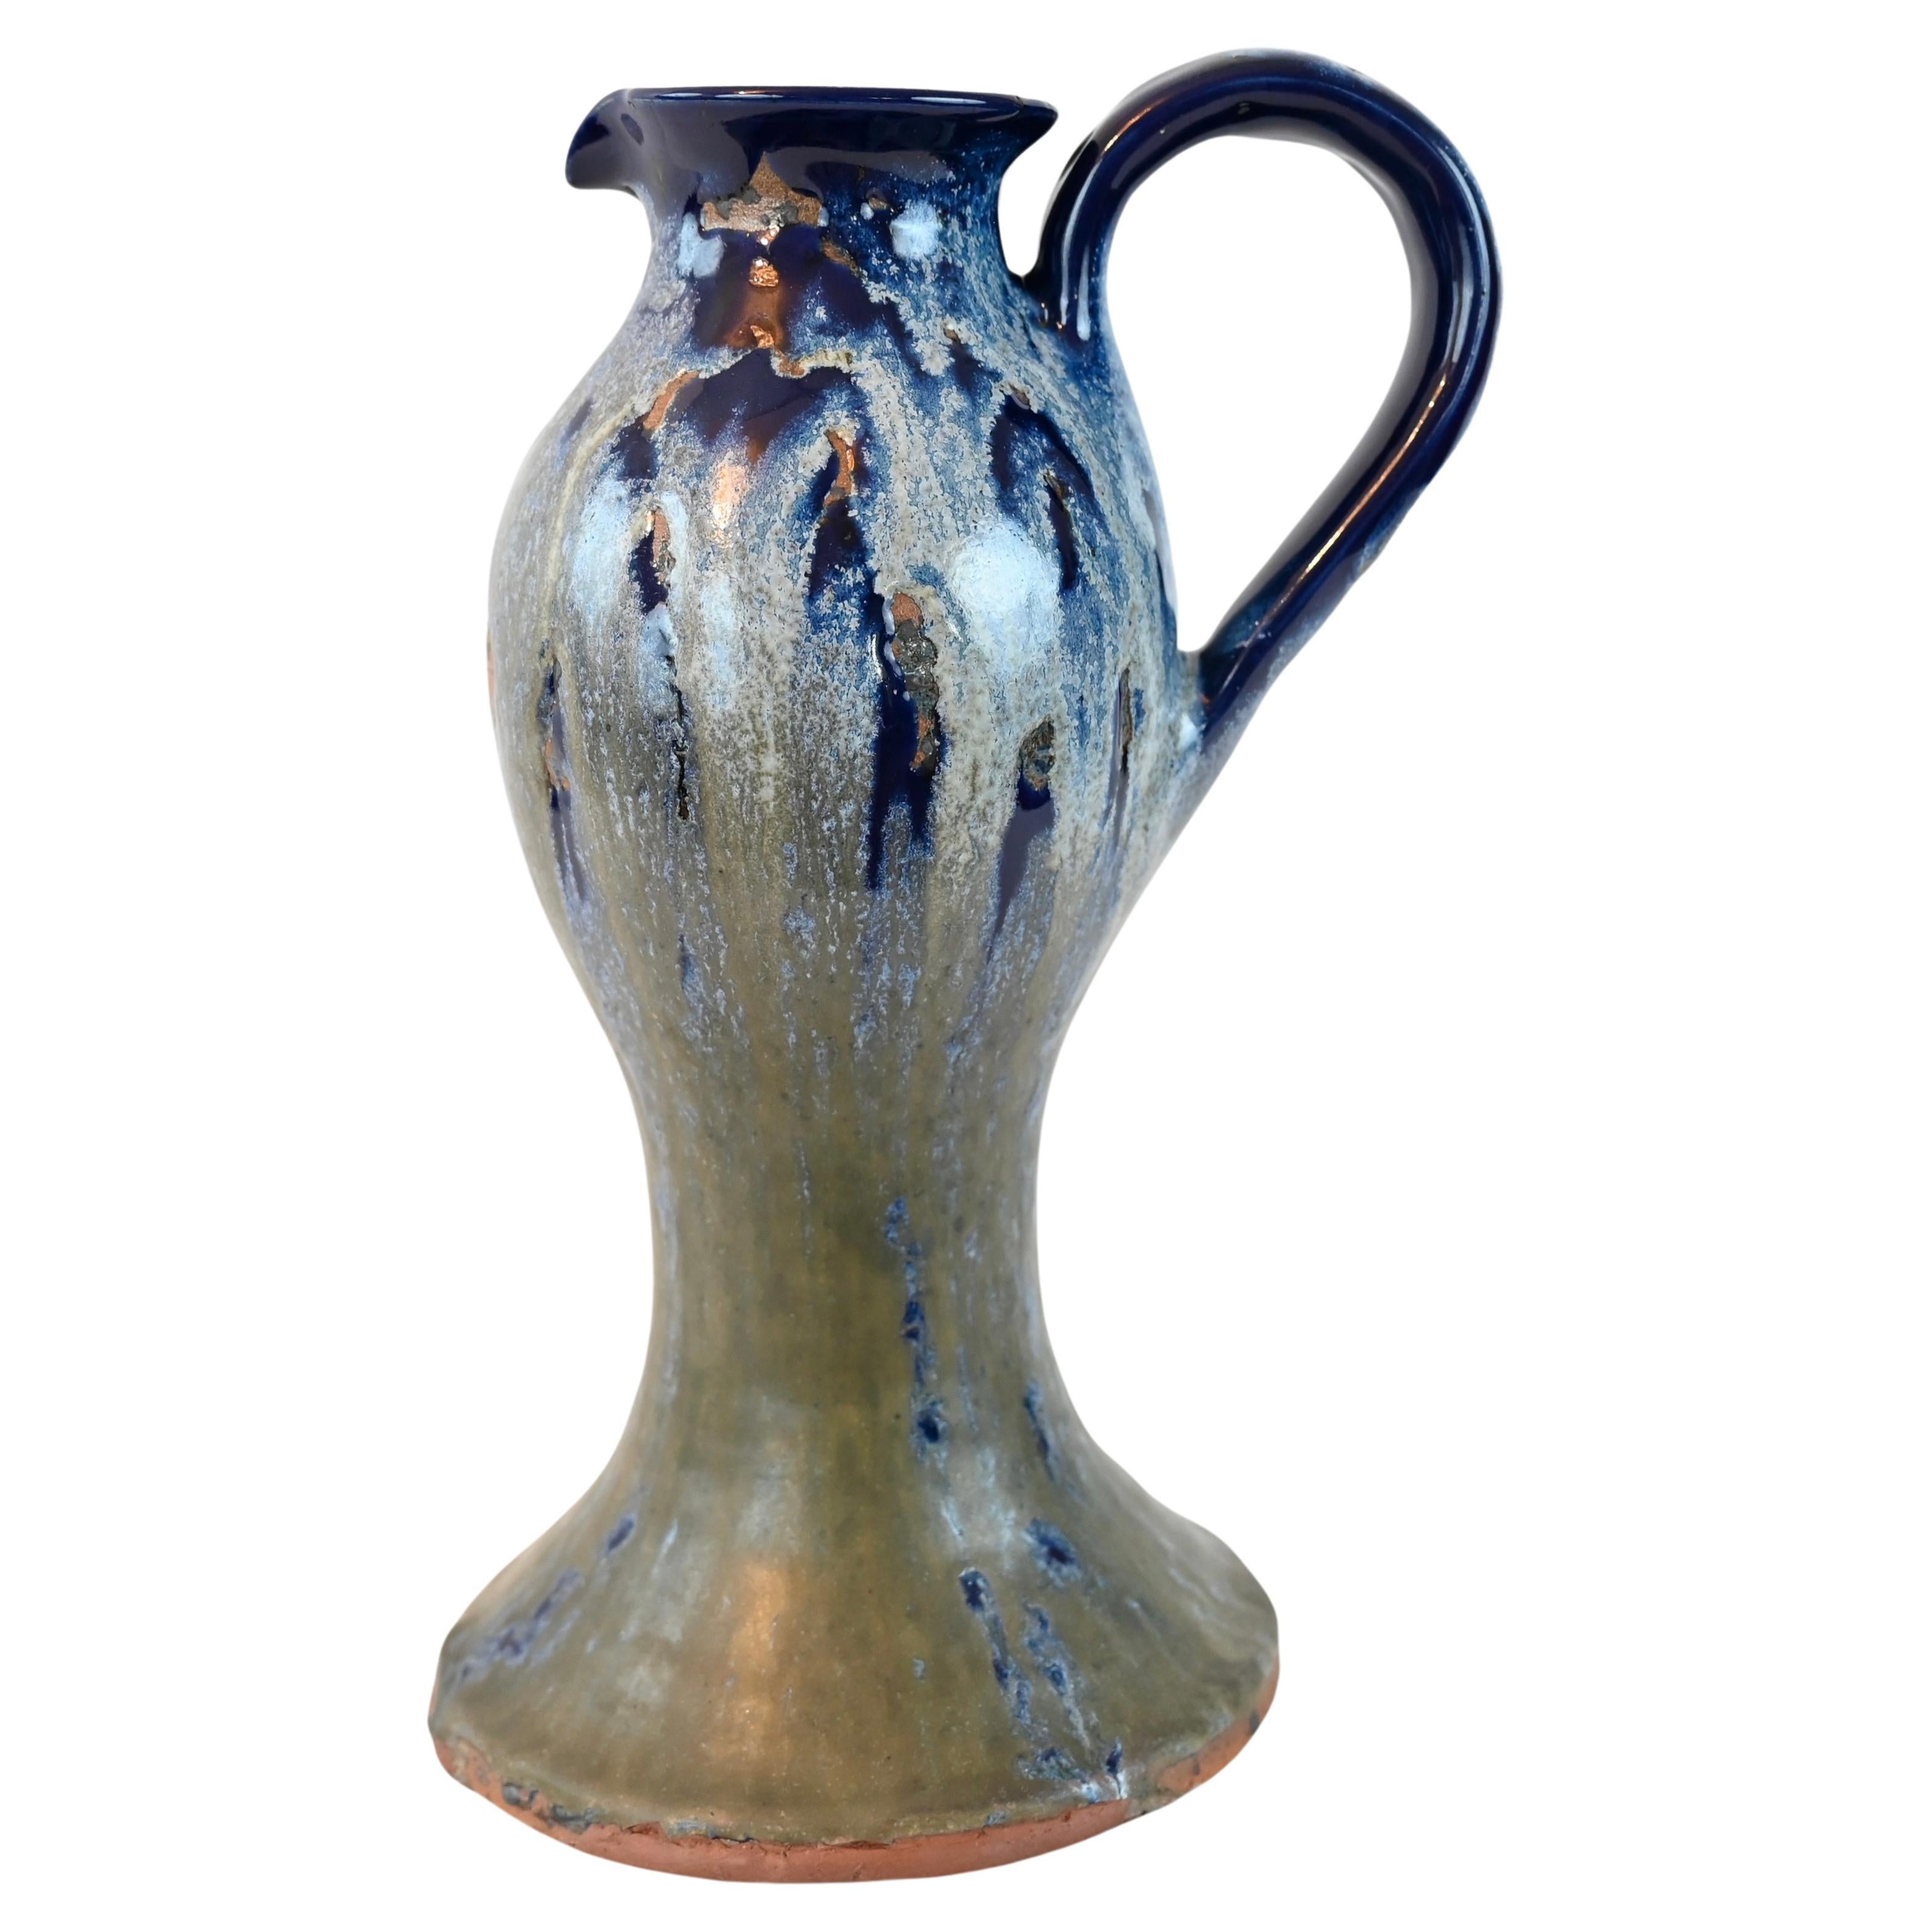 French Art Nouveau Ceramic Vase in a Pitcher Form Attrib. to Charles Gerber